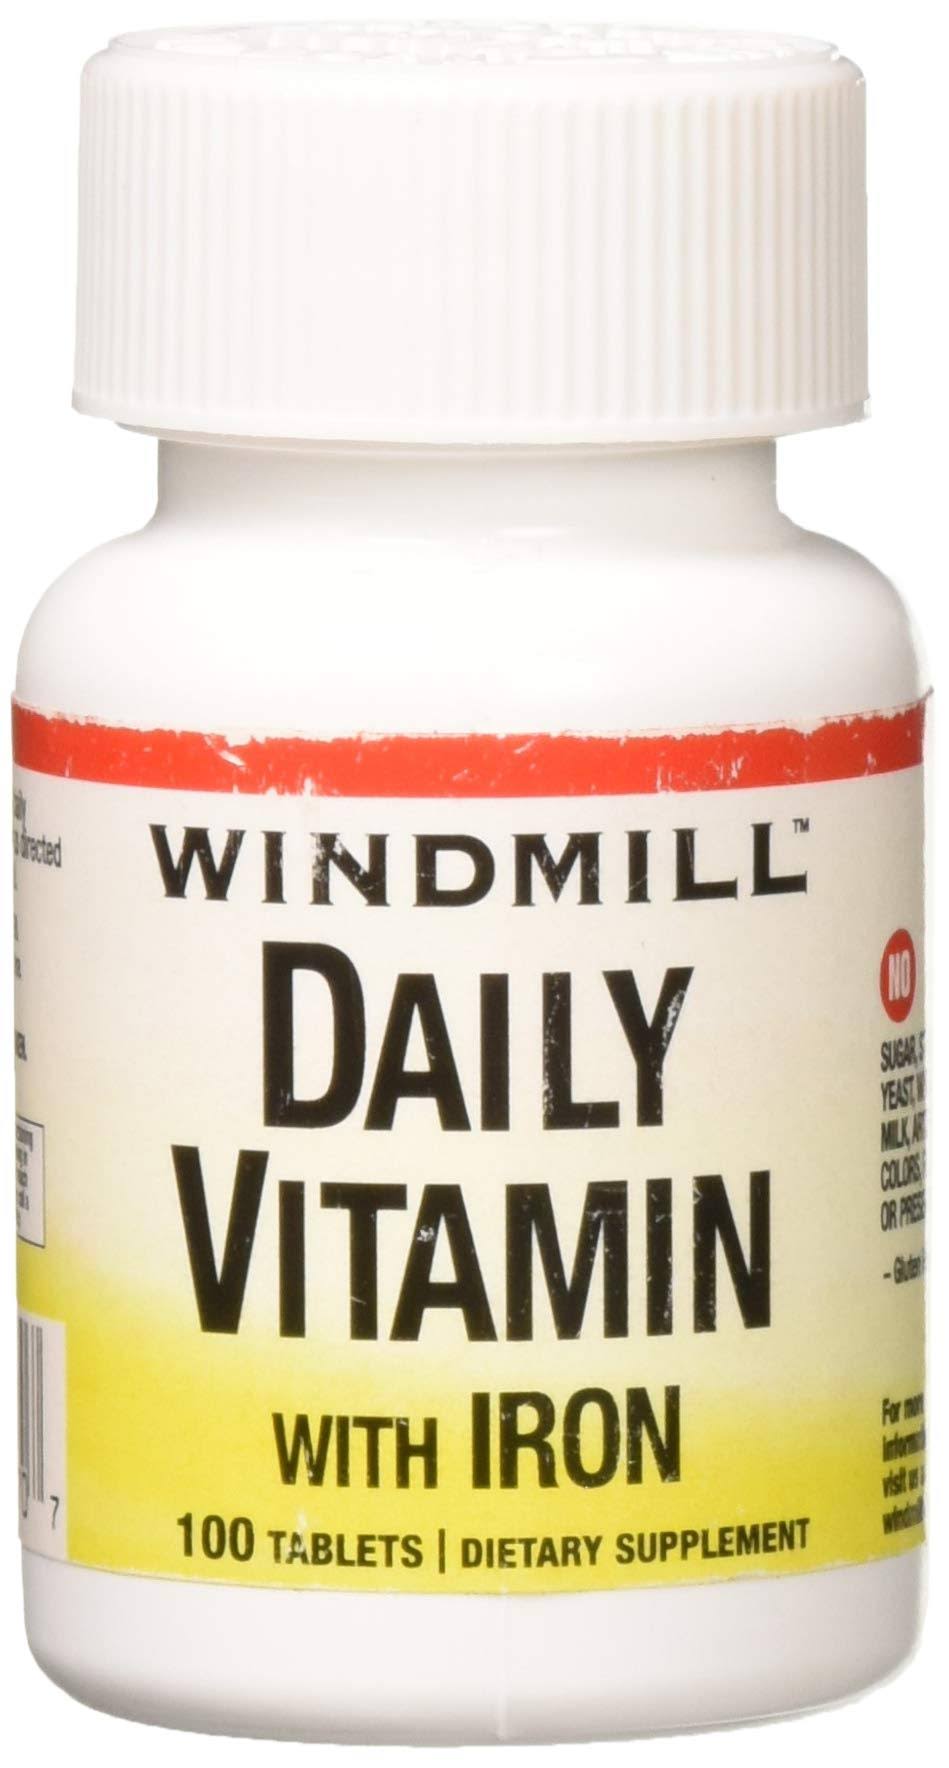 Windmill Daily-Vitamin with Iron - 100 Tablets